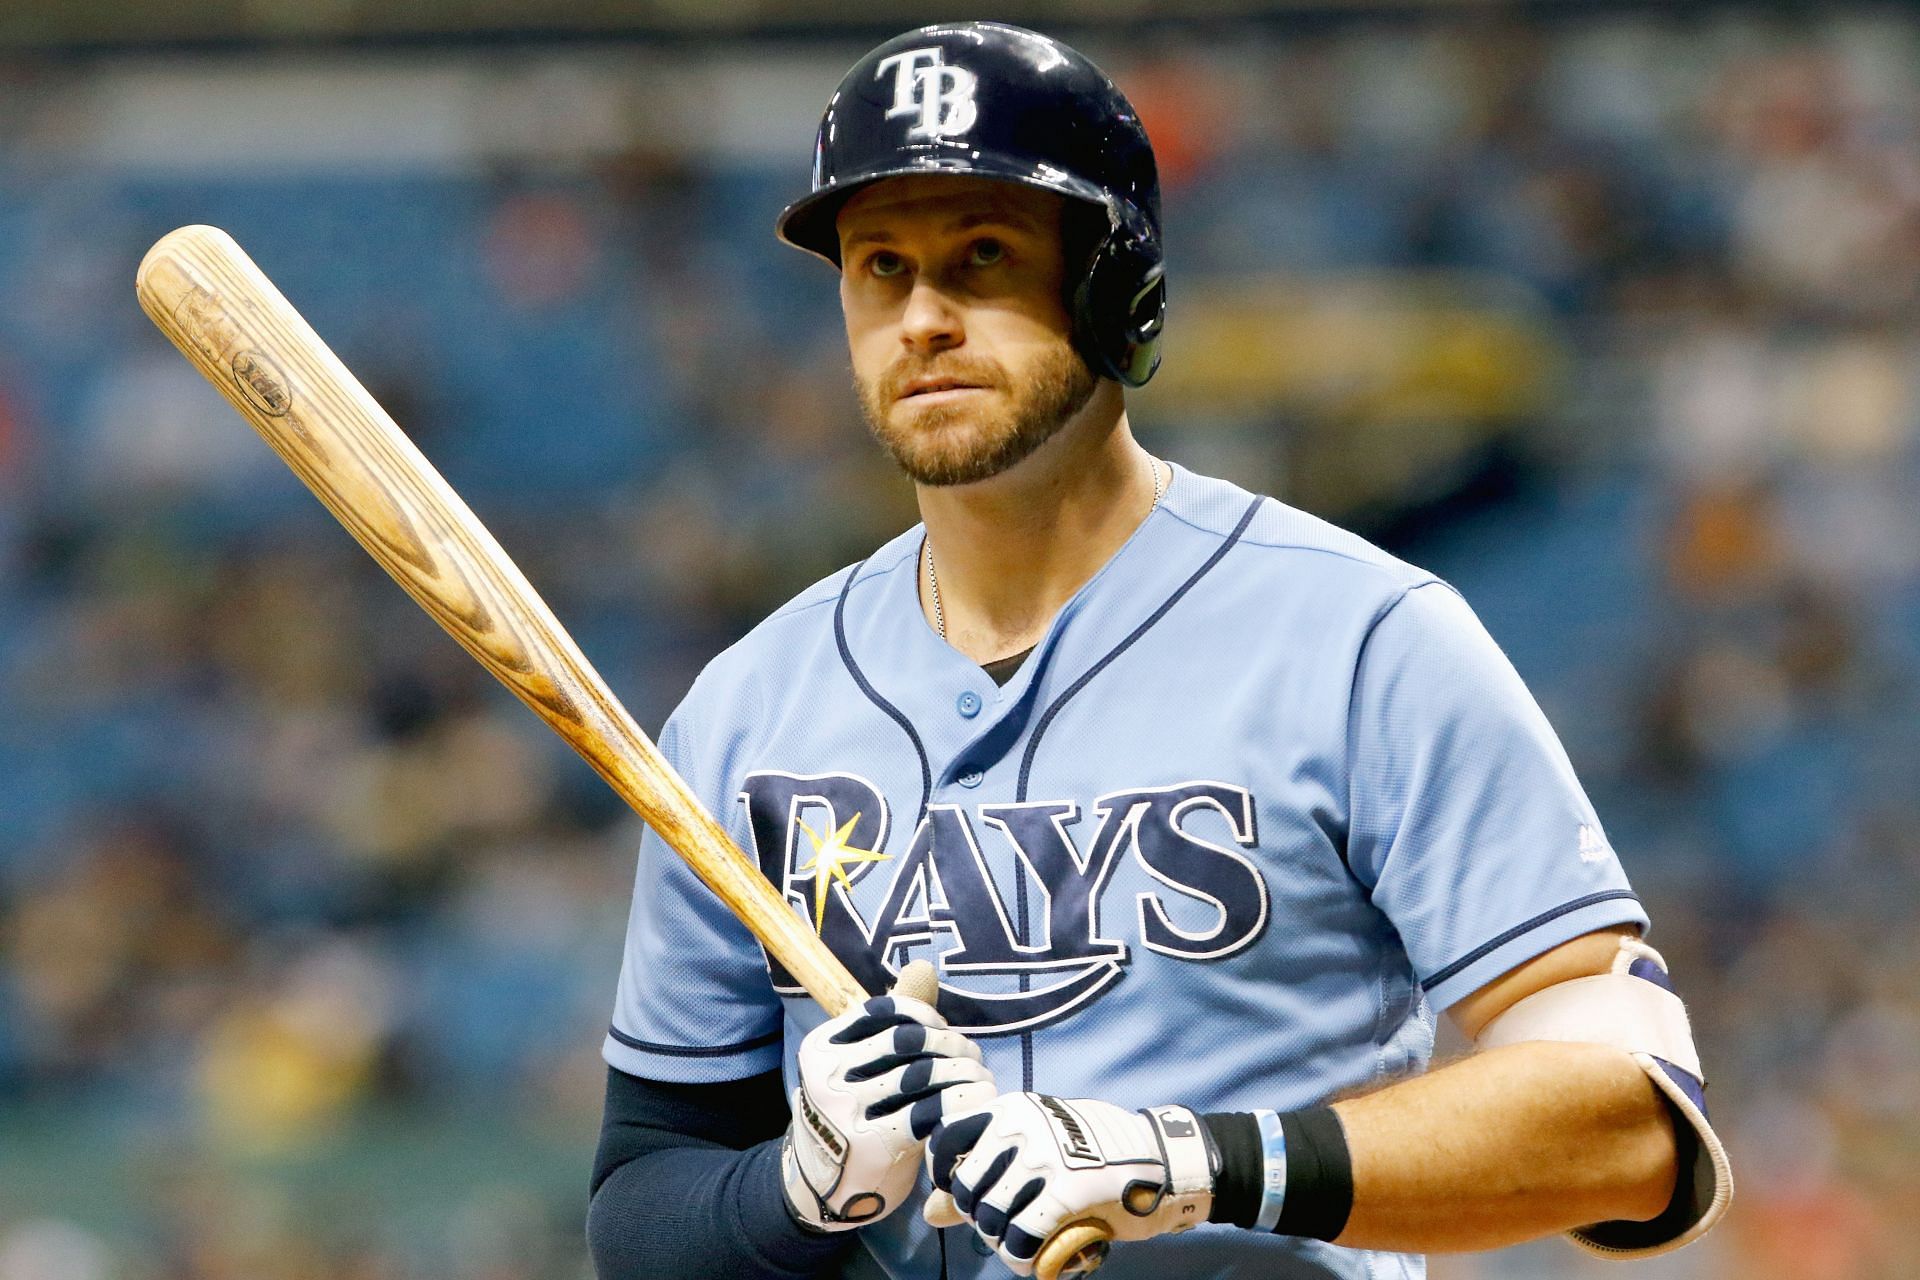 Blog - The Real Story Behind Evan Longoria's Crazy Baseball Catch